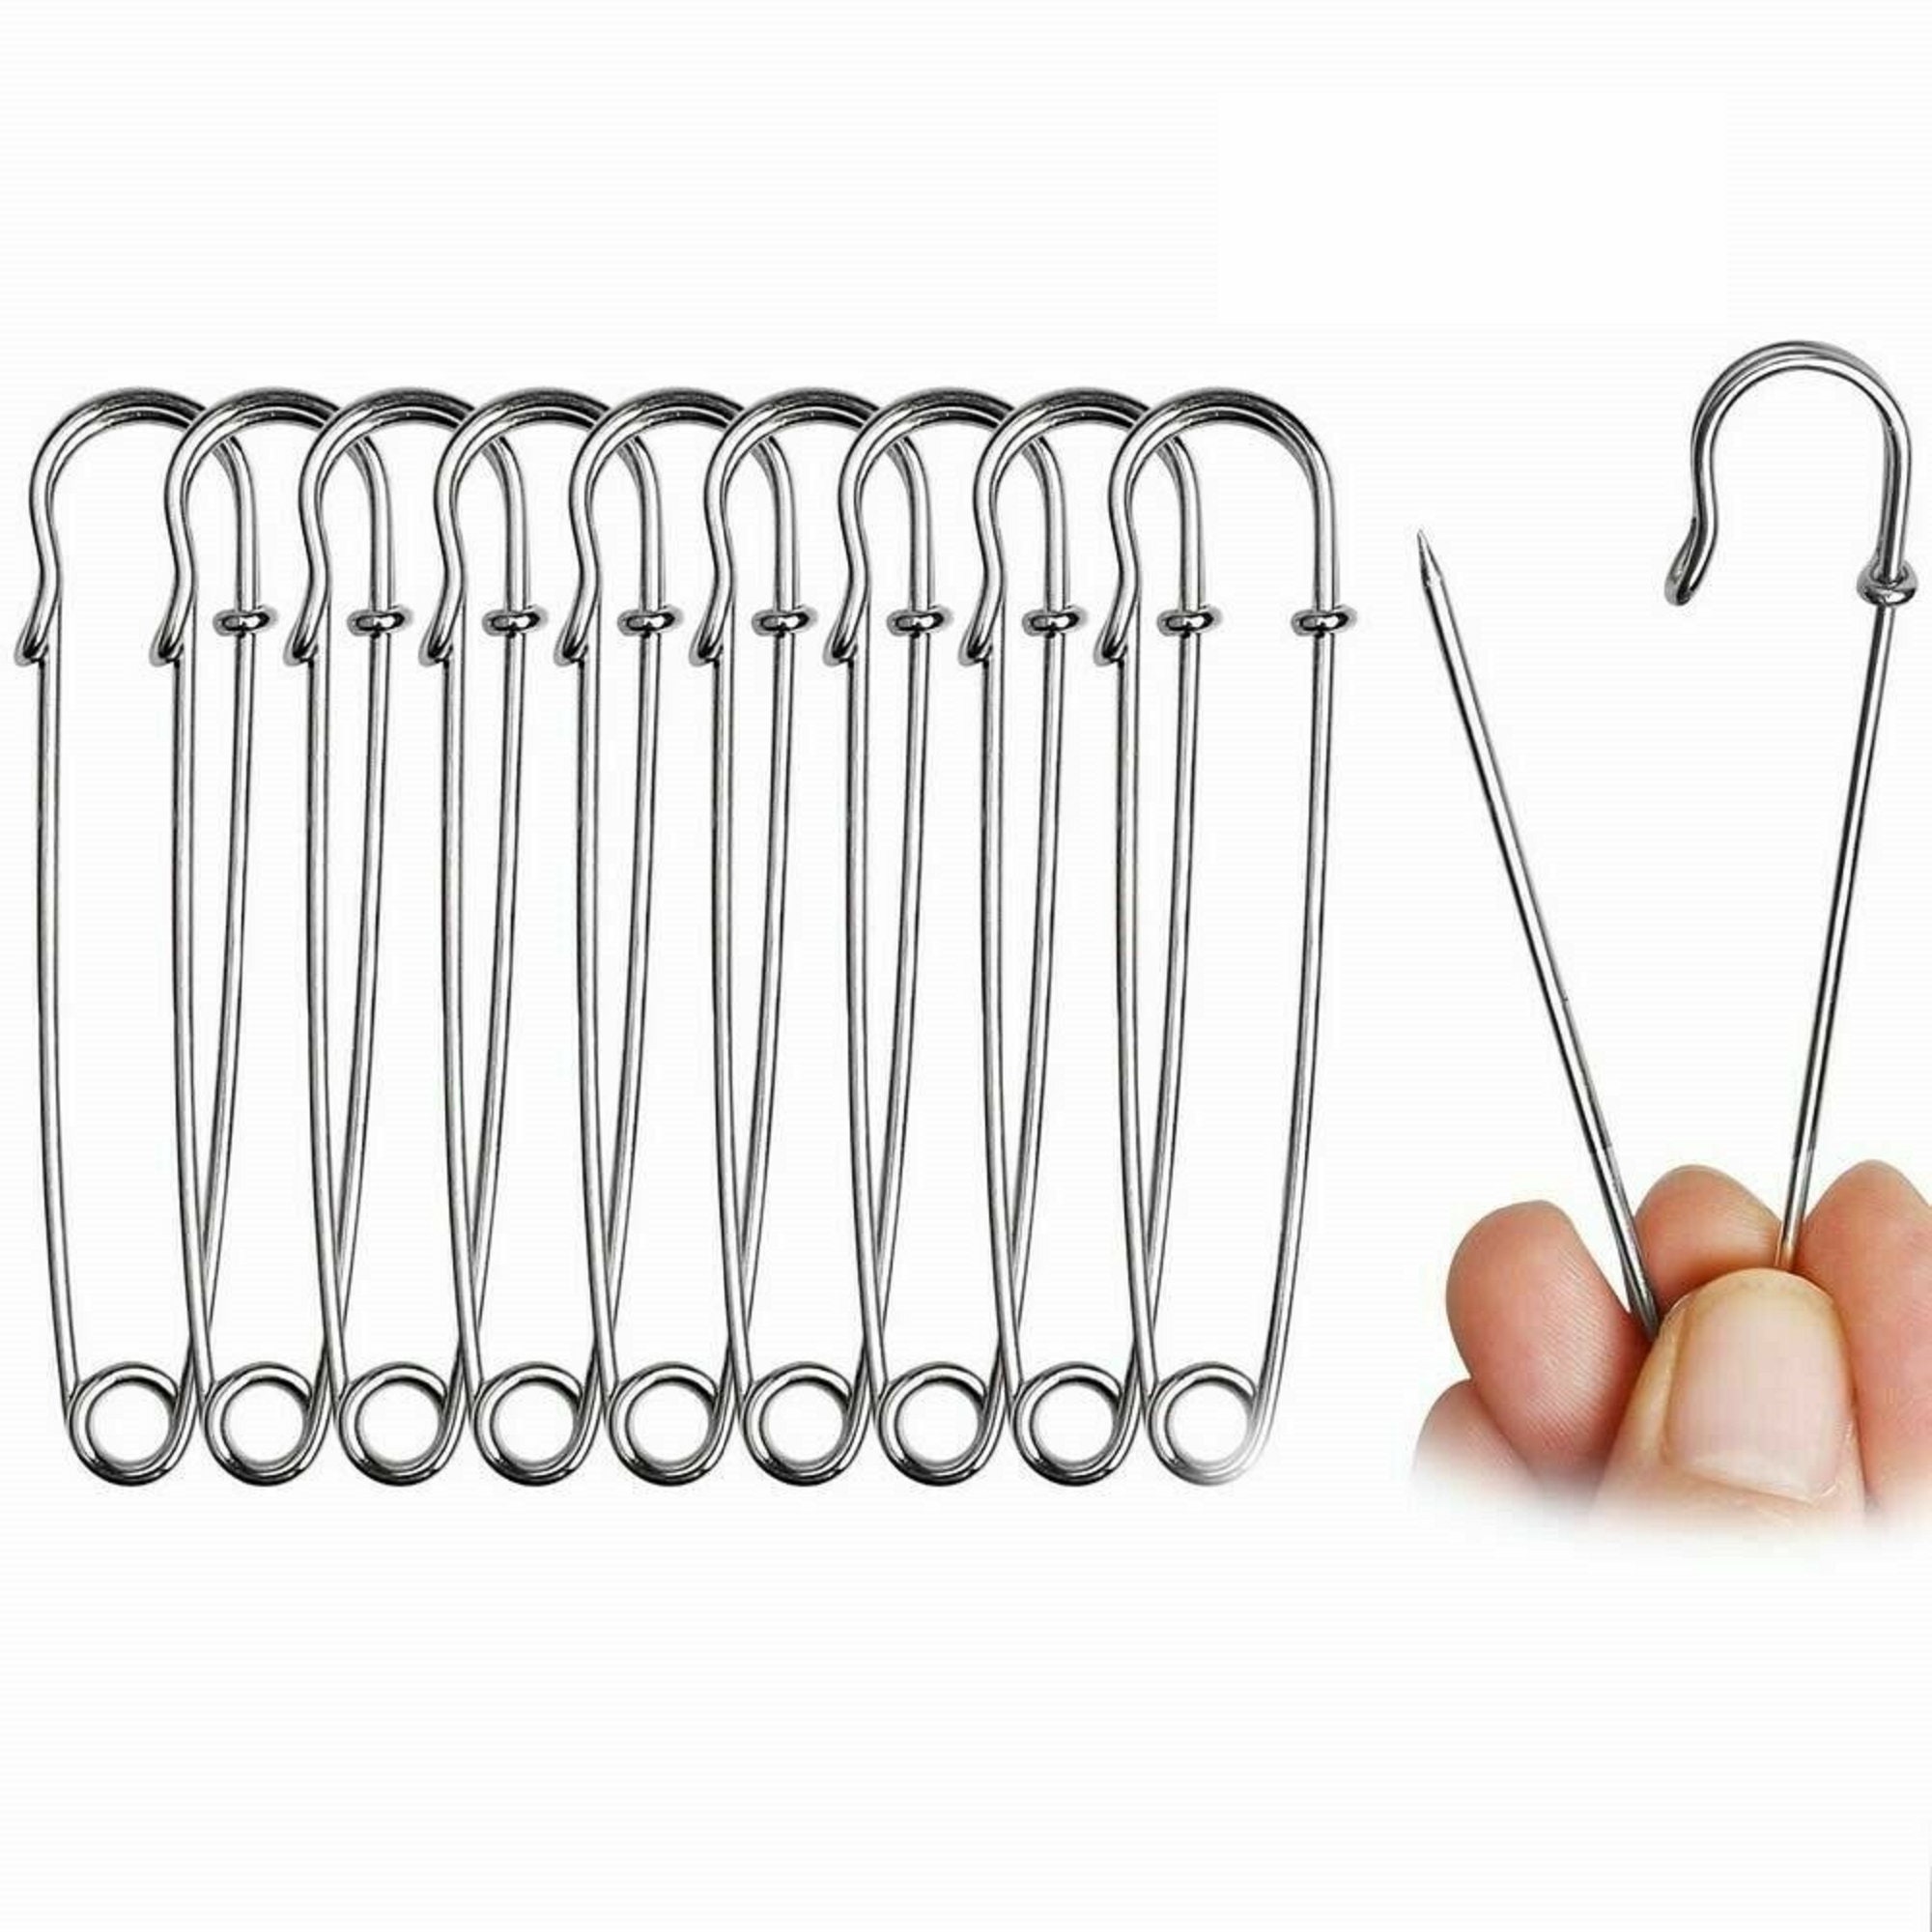 Extra Large Bronze Strong Heavy Duty Safety Pins Craft Jewelry Laundry  Sewing Aids 